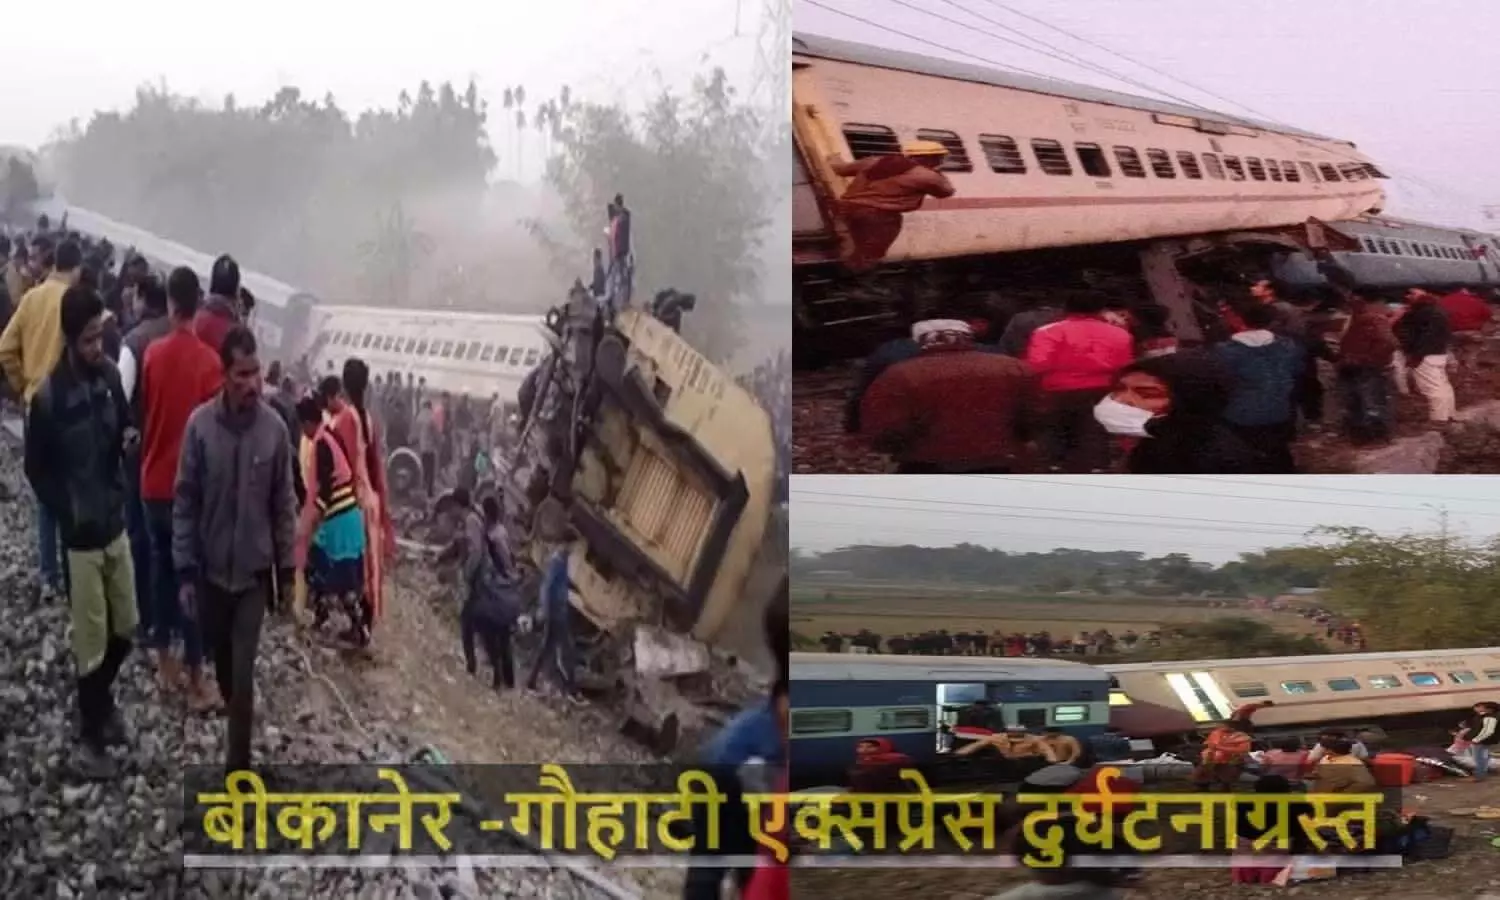 Train Accident: Bikaner-Guwahati Express train derailed, there is a possibility of loss of life and property in large quantity